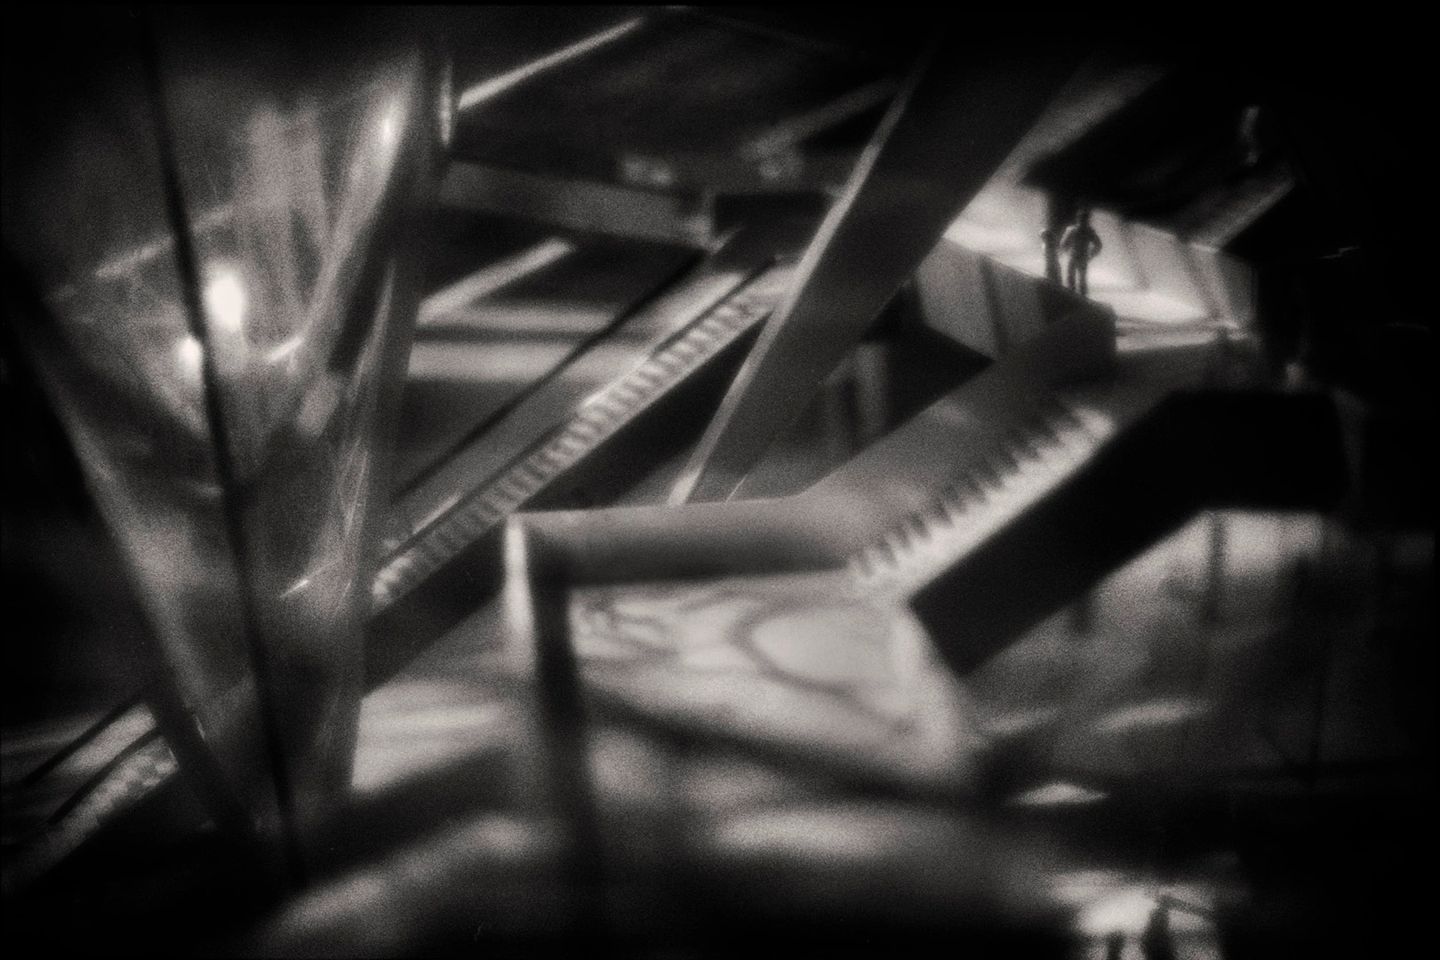 A black and white photo of some piano keys